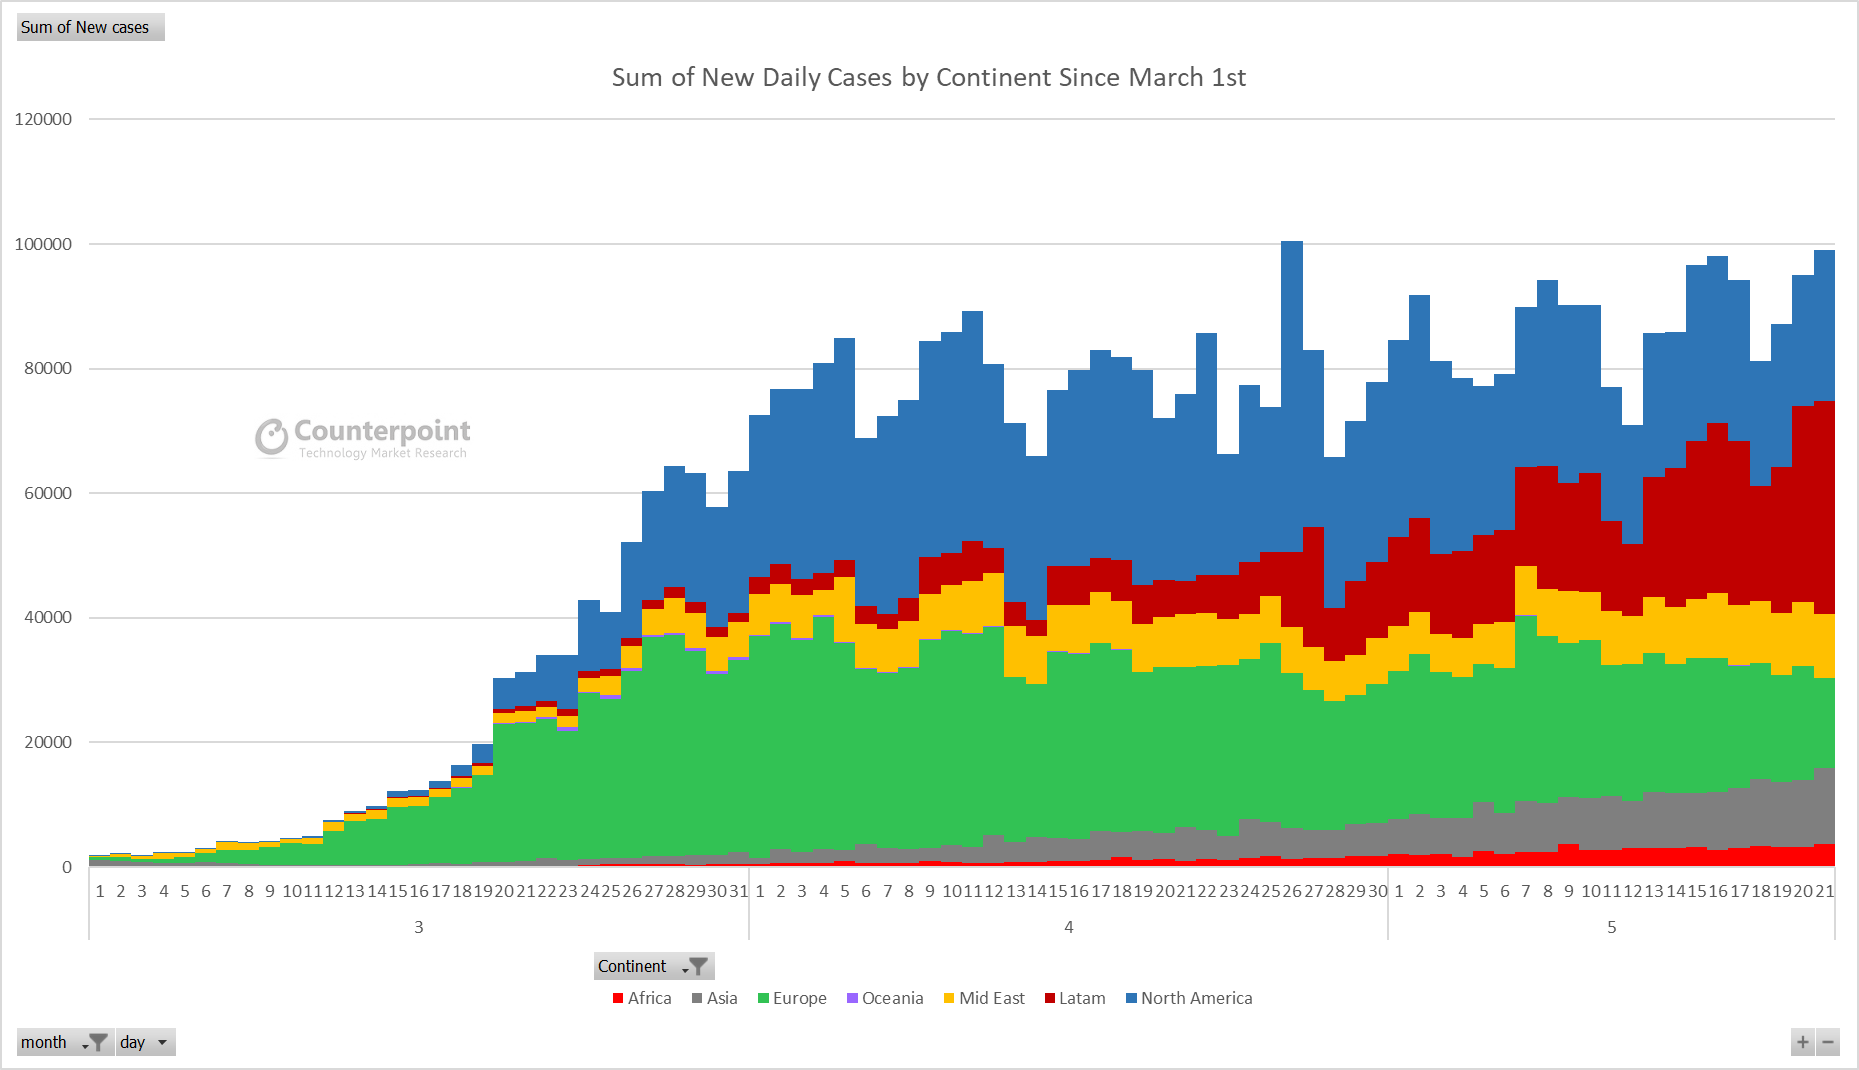 Counterpoint Sum of New Daily Cases by Continent Since March 1st - Week 21 Update